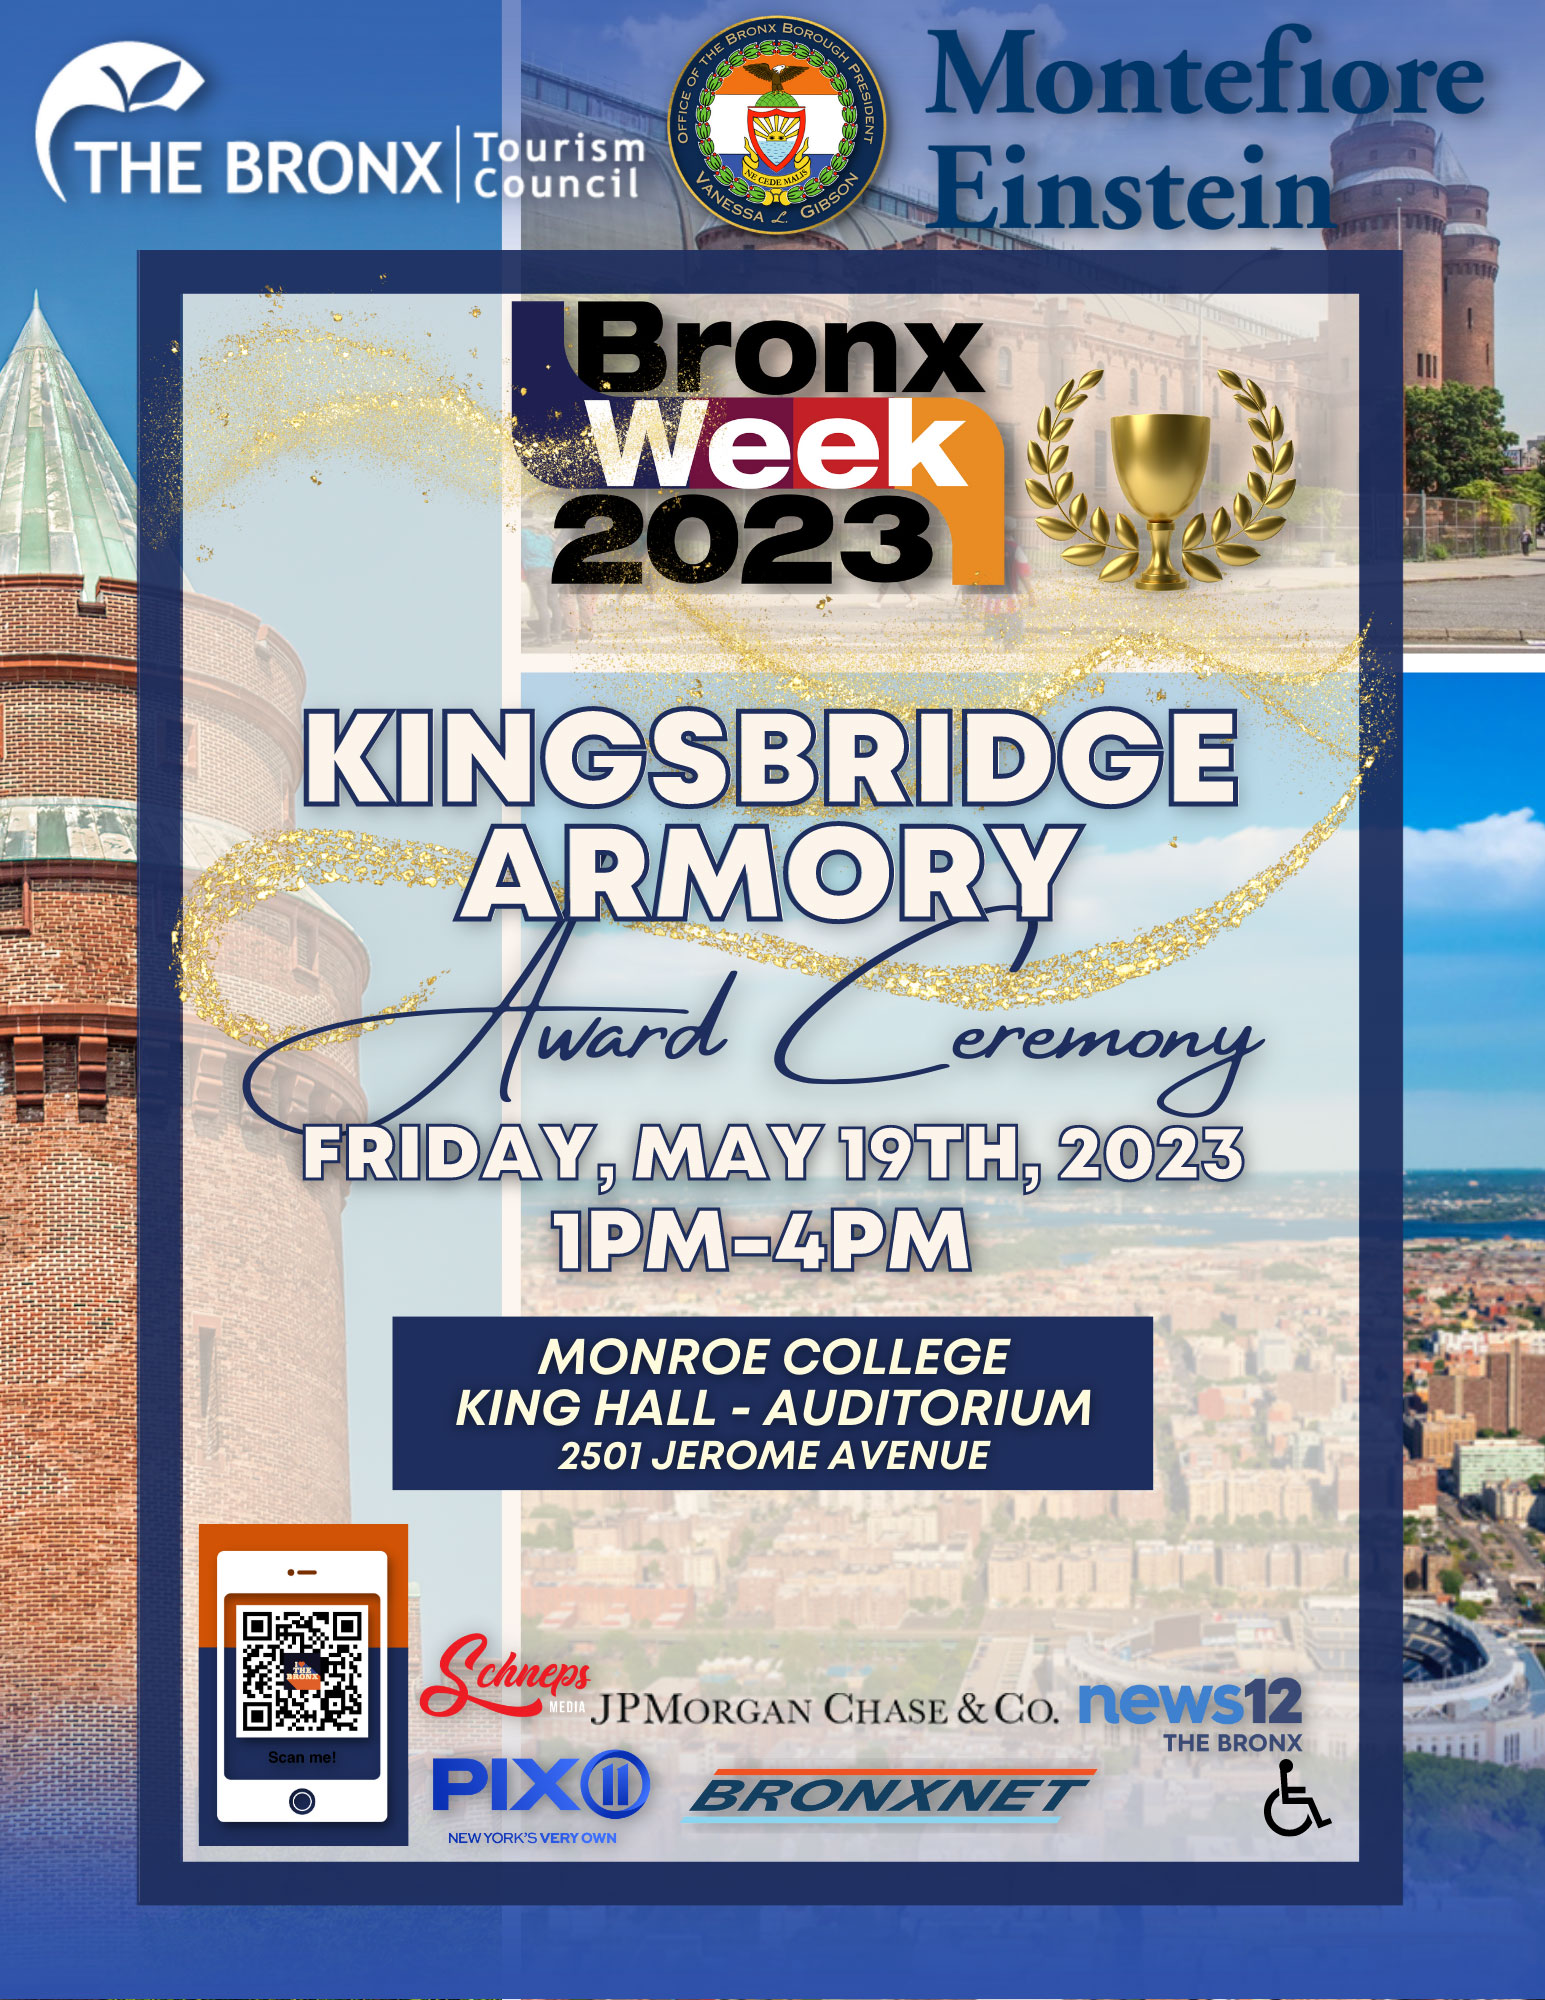 Flyer for a Kingsbridge Armory Award Ceremony as part of Bronx Week on May 19, 2023.